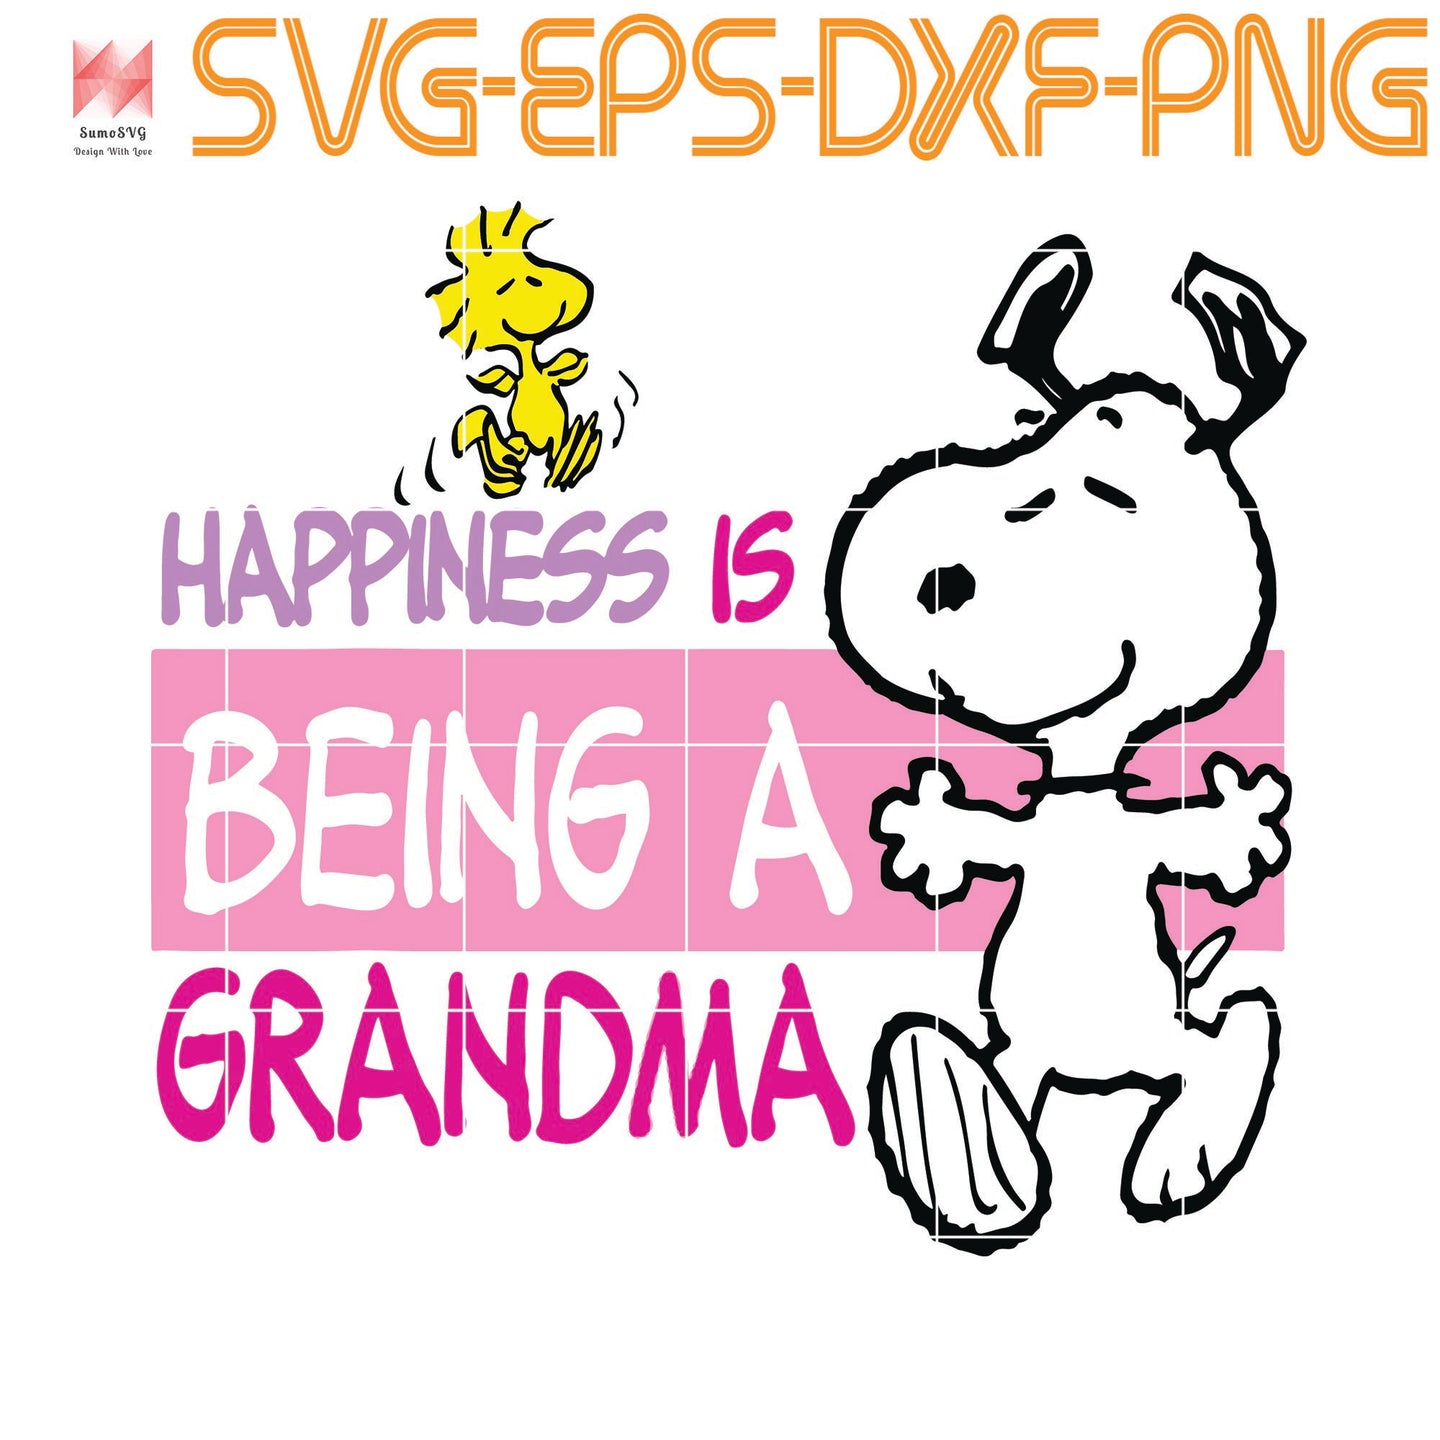 Download Peanuts Snoopy Happiness Is Being A Grandma Quotes Svg File For Cric Sumosvg